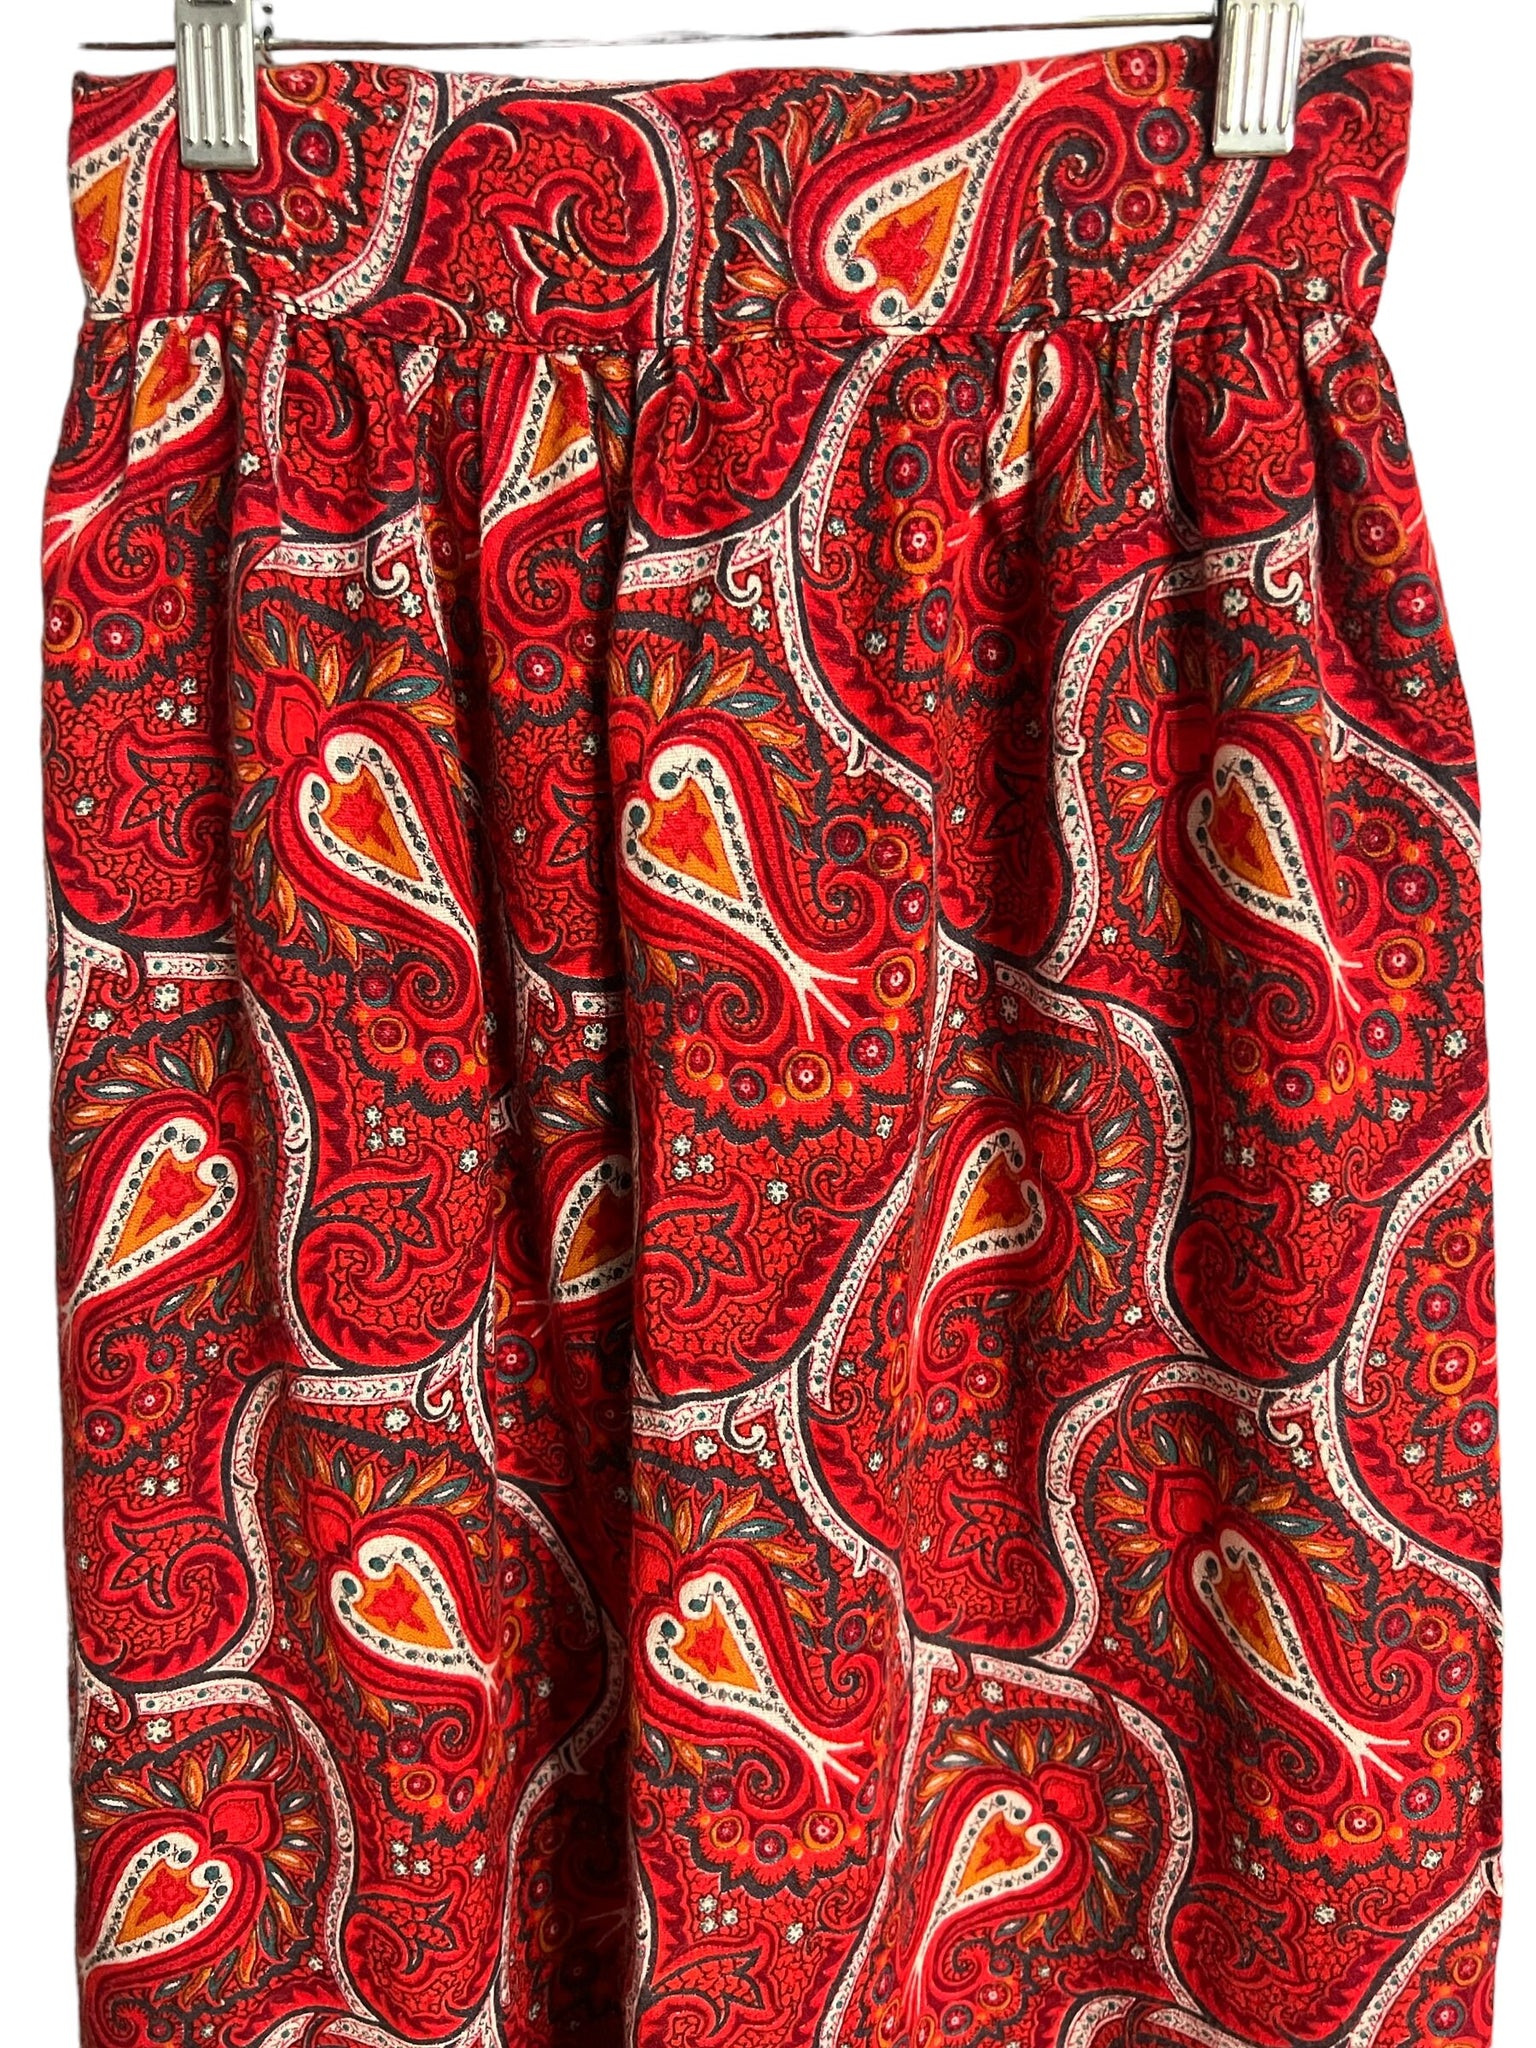 Vintage 70’s skirt red paisley S XS